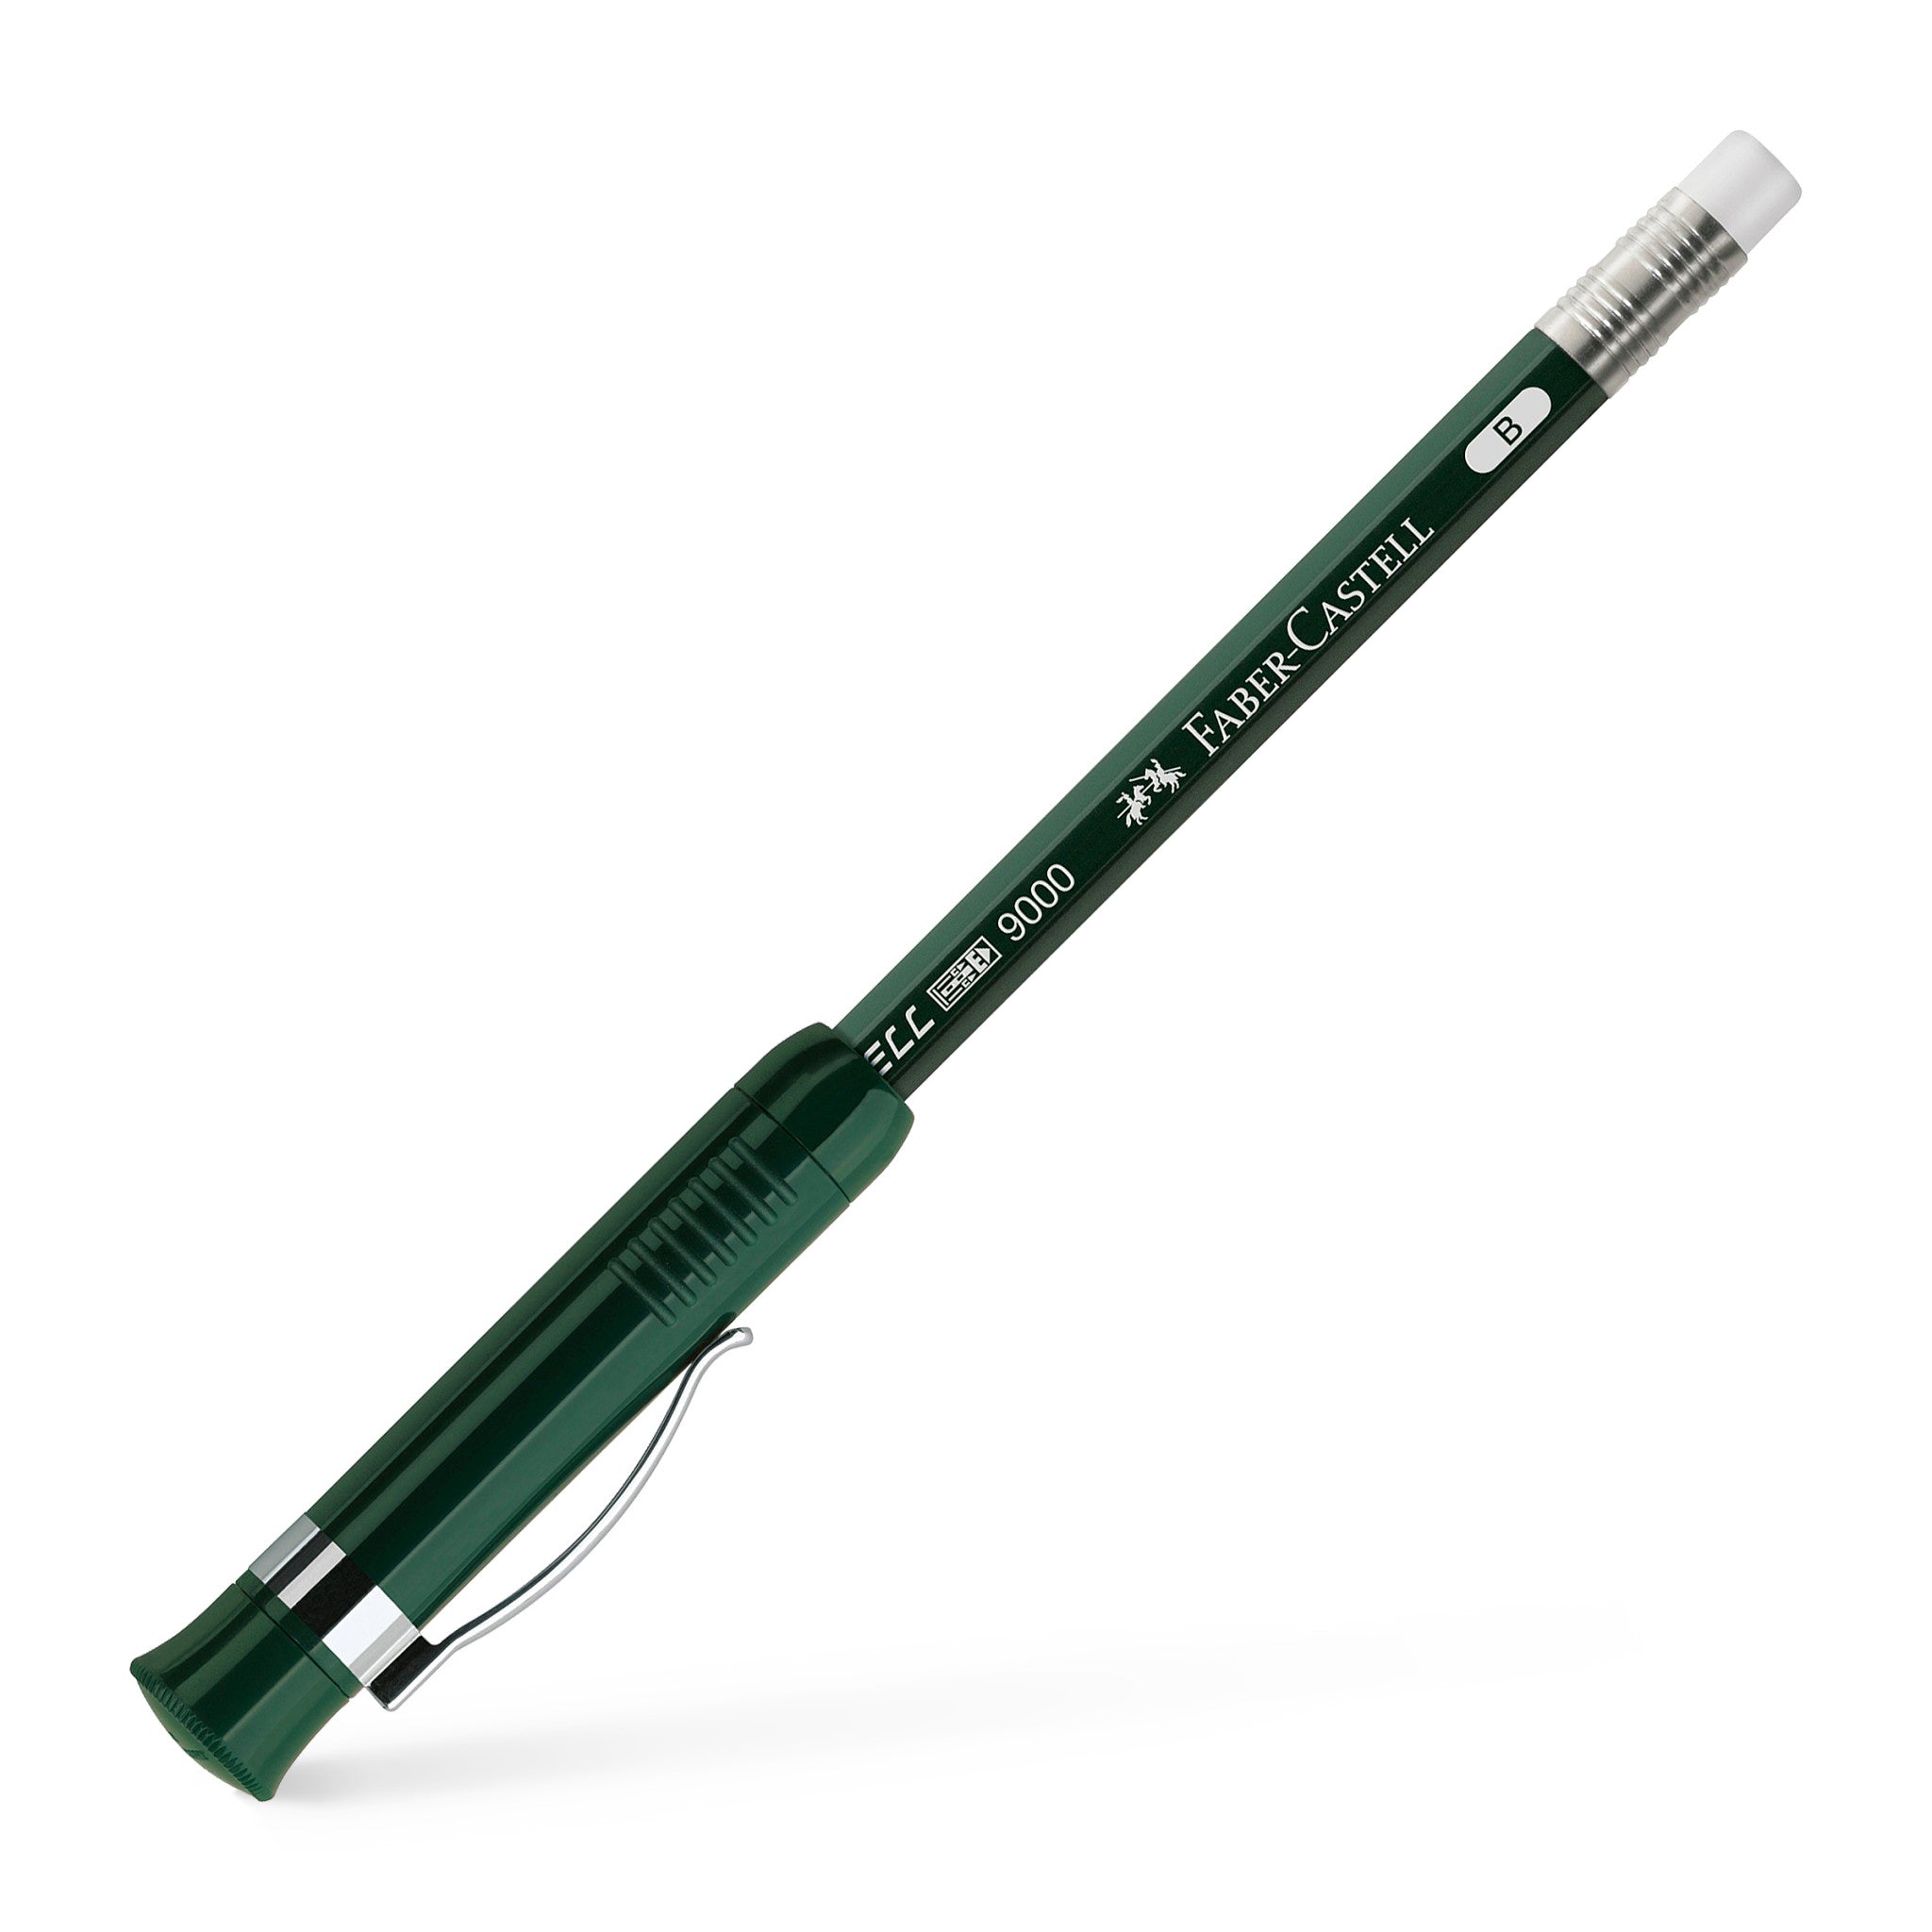 Faber Castell 9000 Perfect Pencil